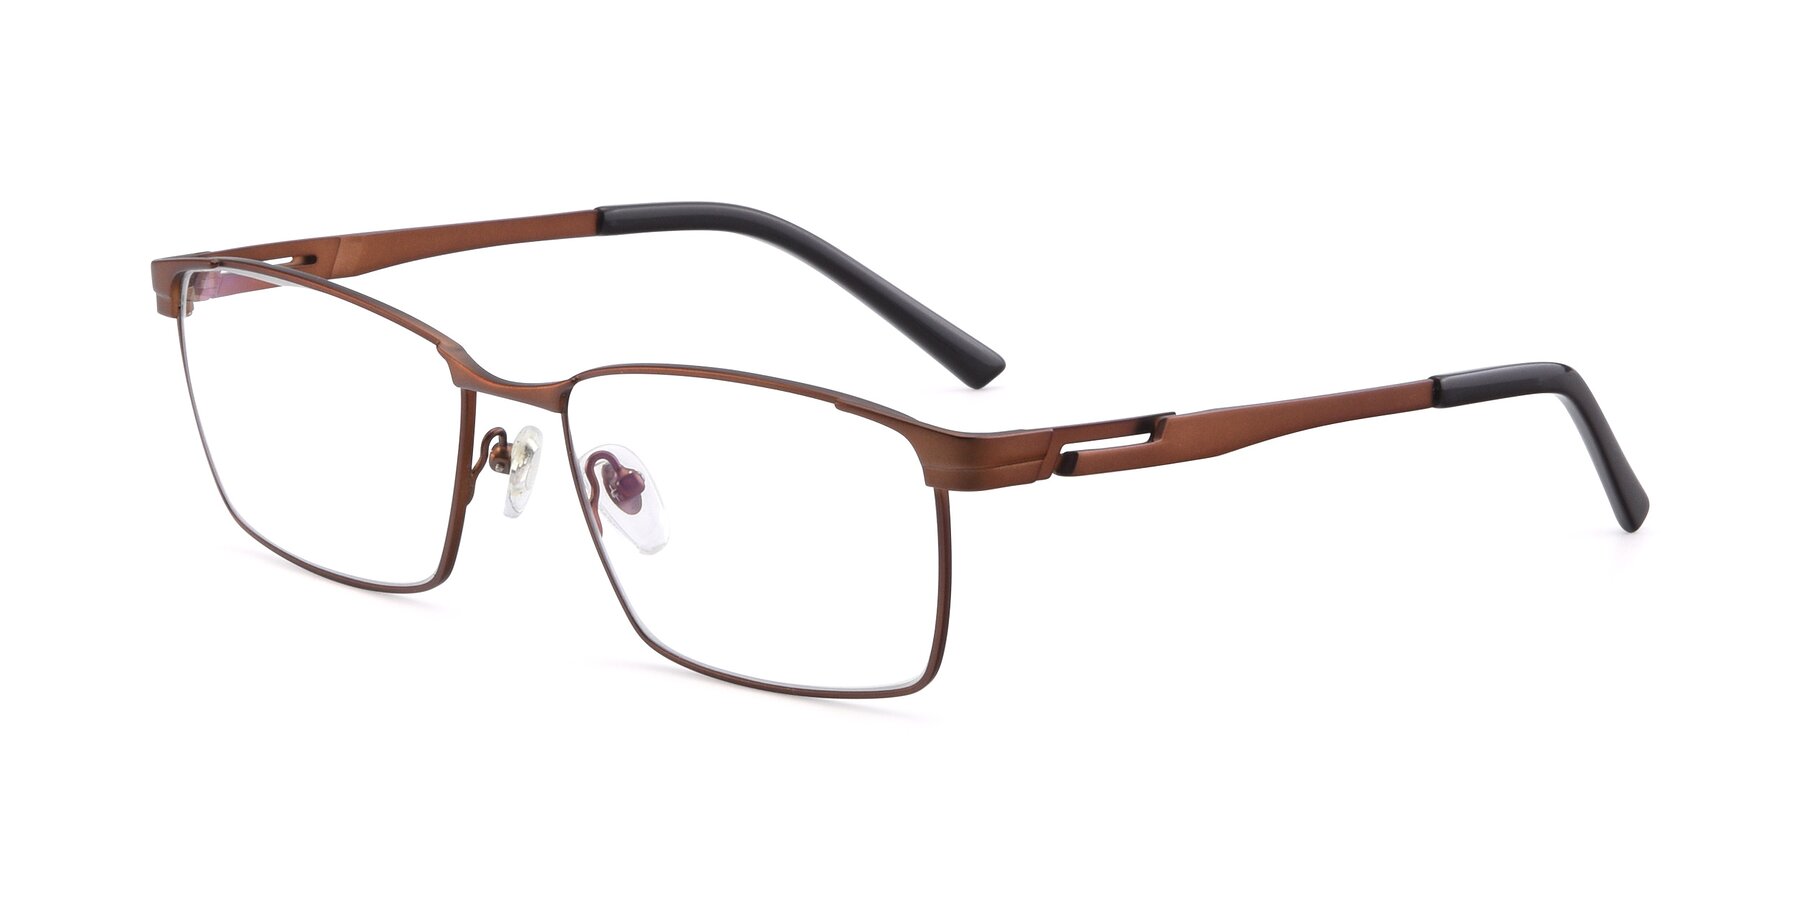 Angle of 19021 in Brown with Clear Eyeglass Lenses